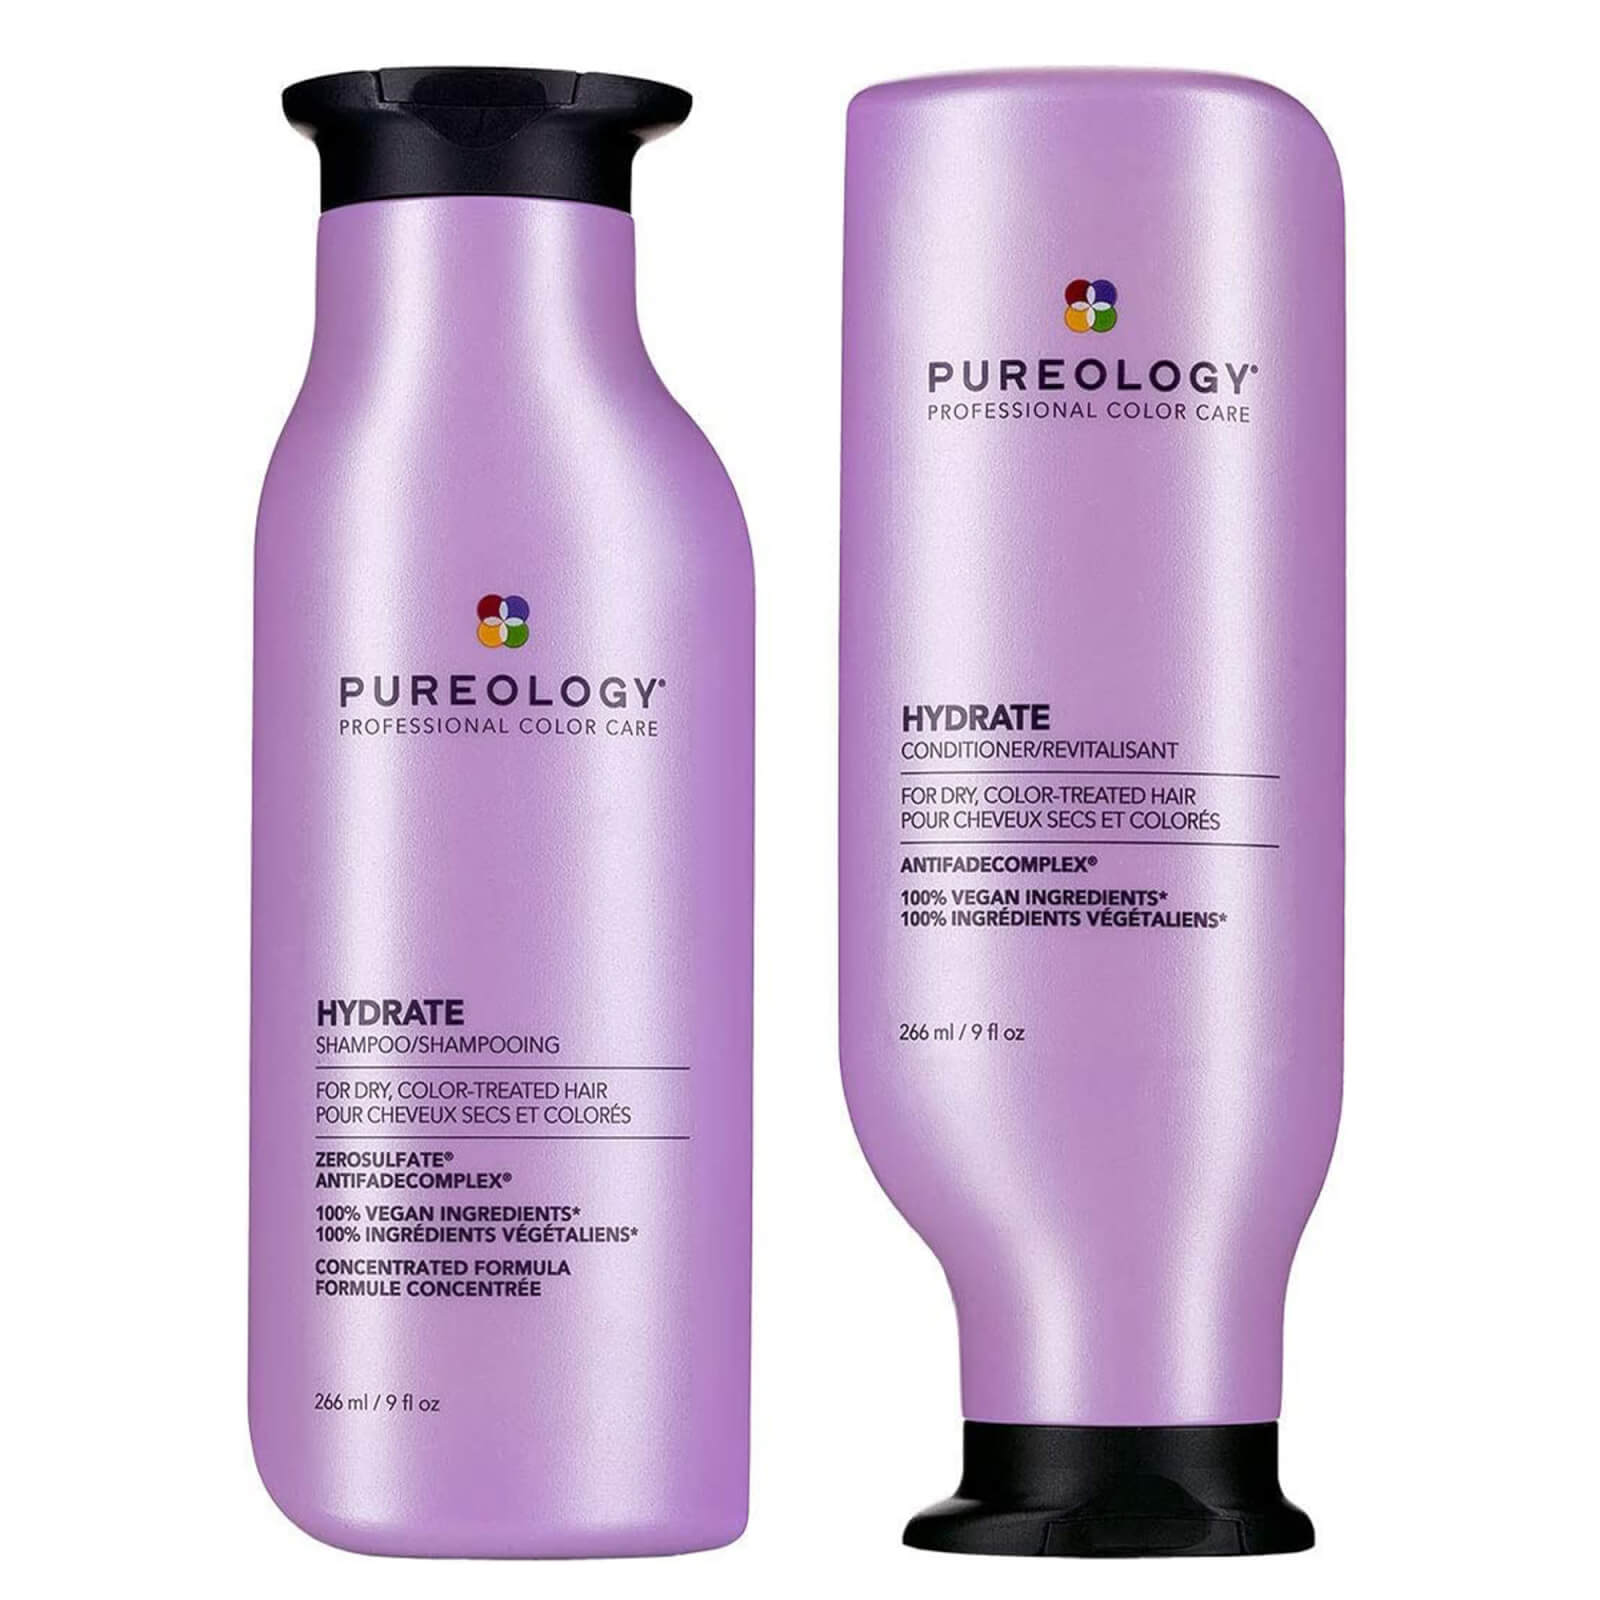 Pureology Hydrate Shampoo and Conditioner Moisturising Bundle for Dry Hair, Sulphate Free for a Gent